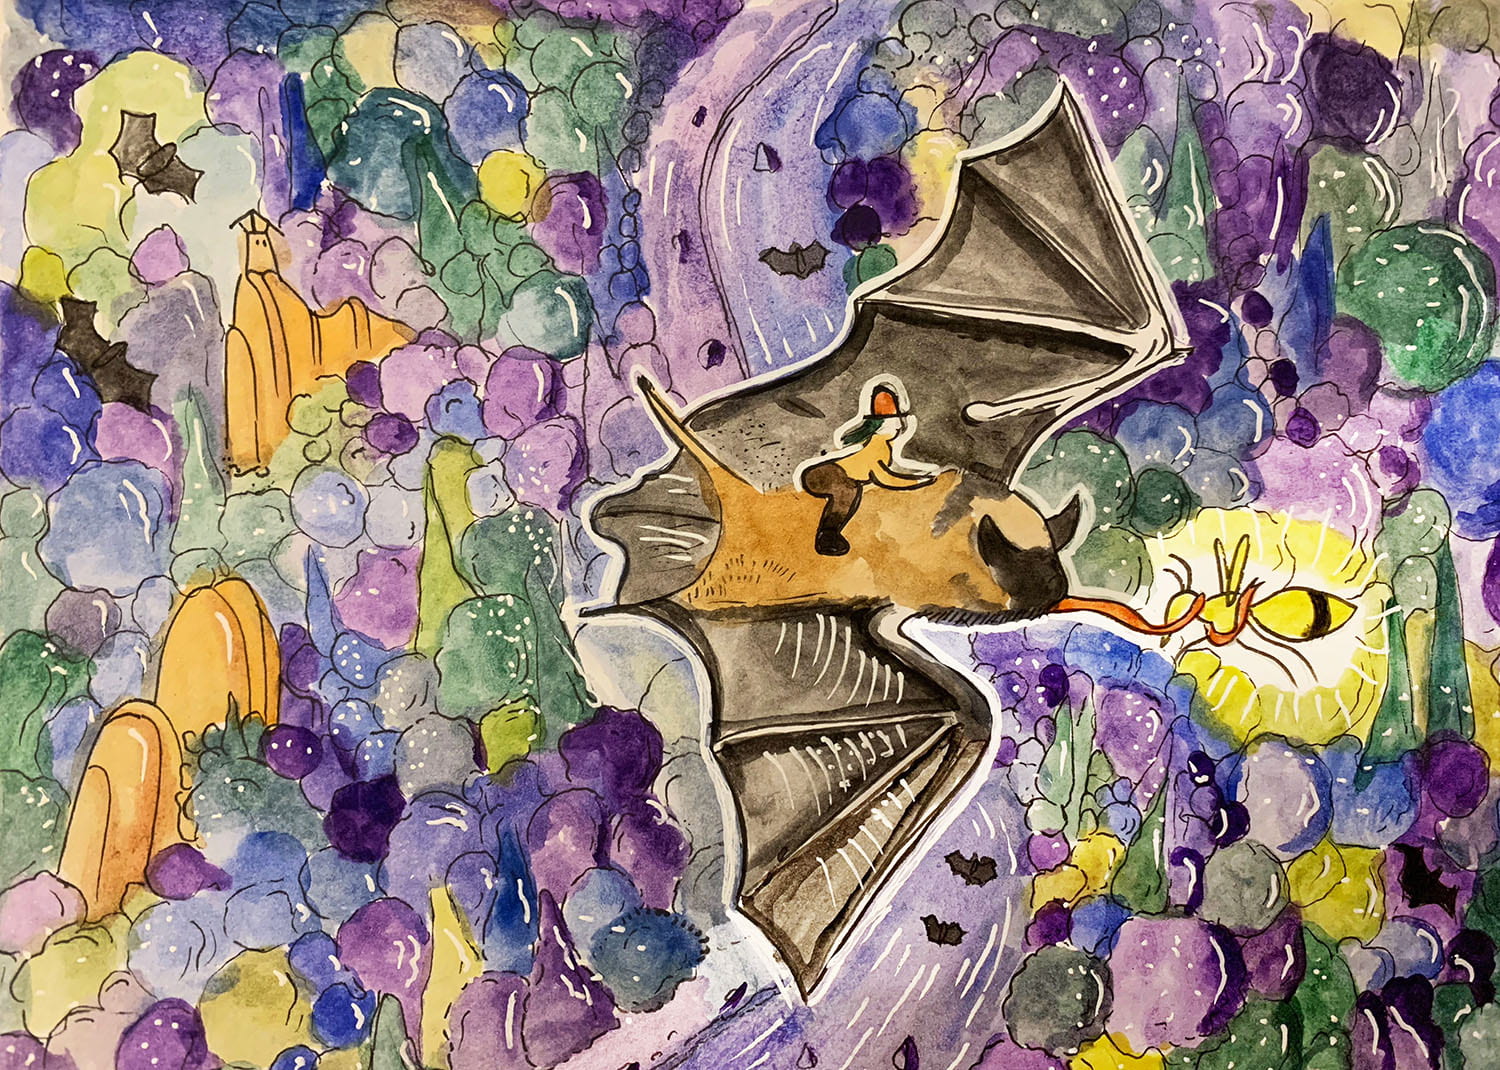 watercolor illustration showing a person riding a bat that is catching a bee, while flying high over a forest